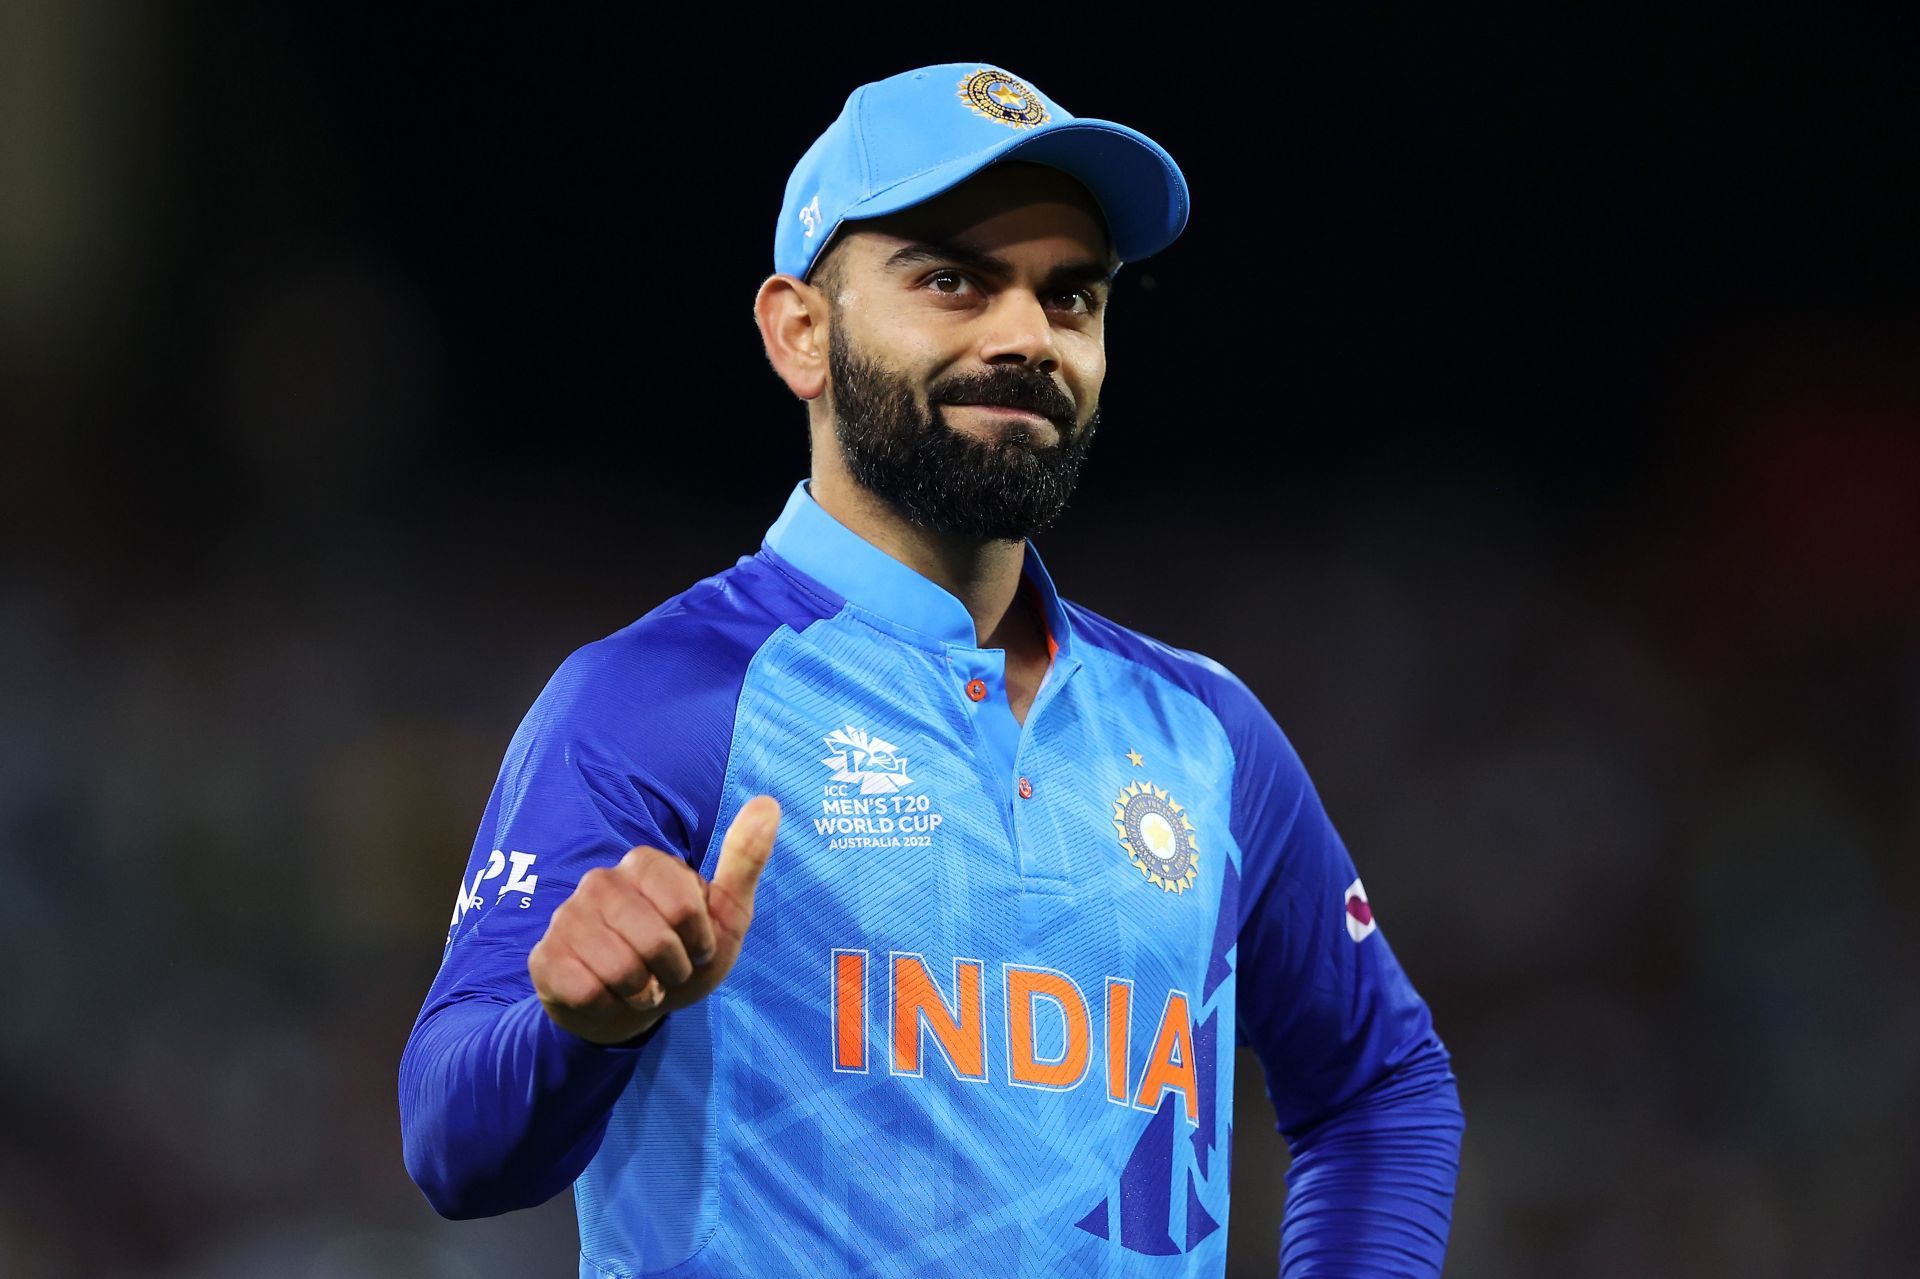 Virat Kohli has a spectacular record in all forms of the game